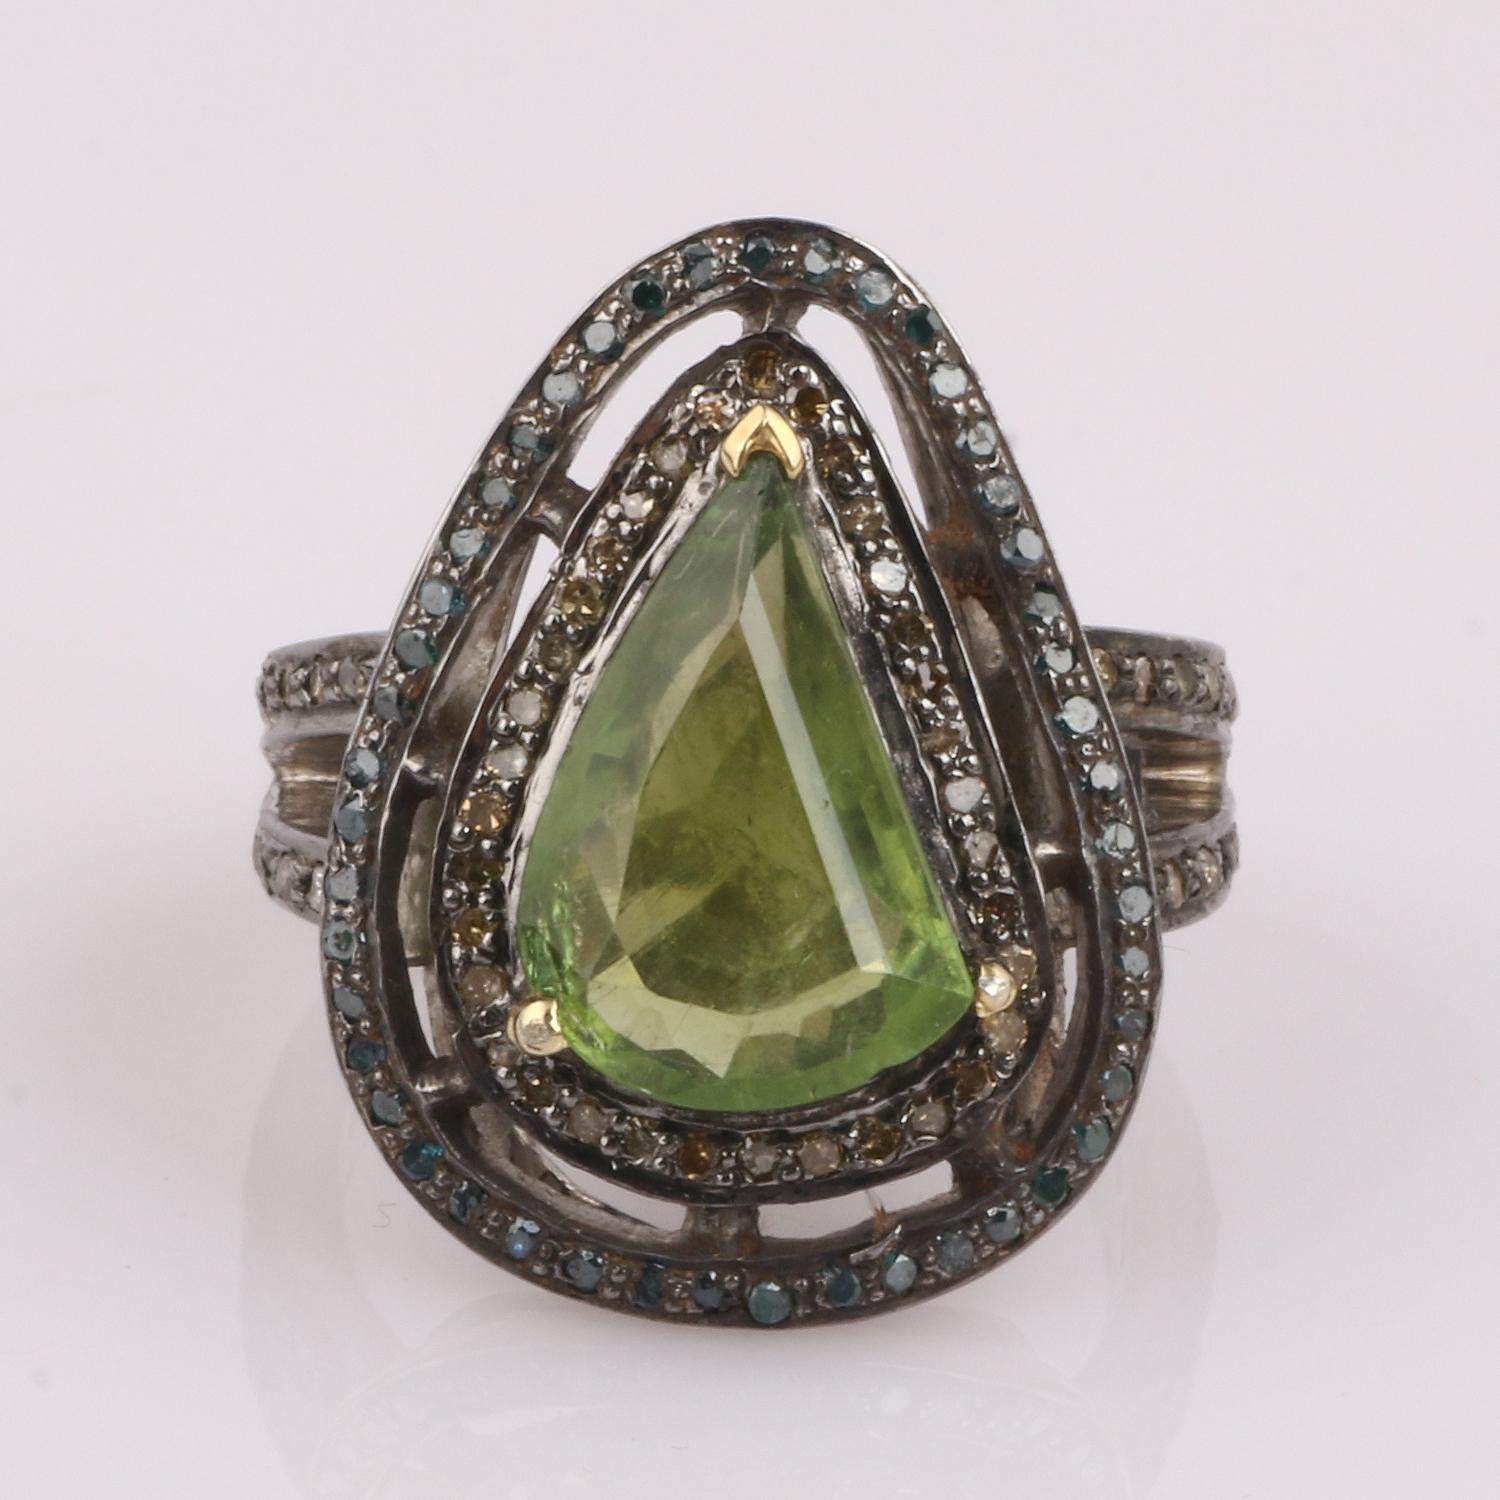 Item details:-

✦ SKU:- ESRG00207

✦ Material :- Silver
✦ Gemstone Specification:-
✧ Diamond
✧ Peridot

✦ Approx. Diamond Weight : 0.8
✦ Approx. Silver Weight : 6.23
✦ Approx. Gross Weight : 7

Ring Size (US): 6.5

You will Get the same Product as